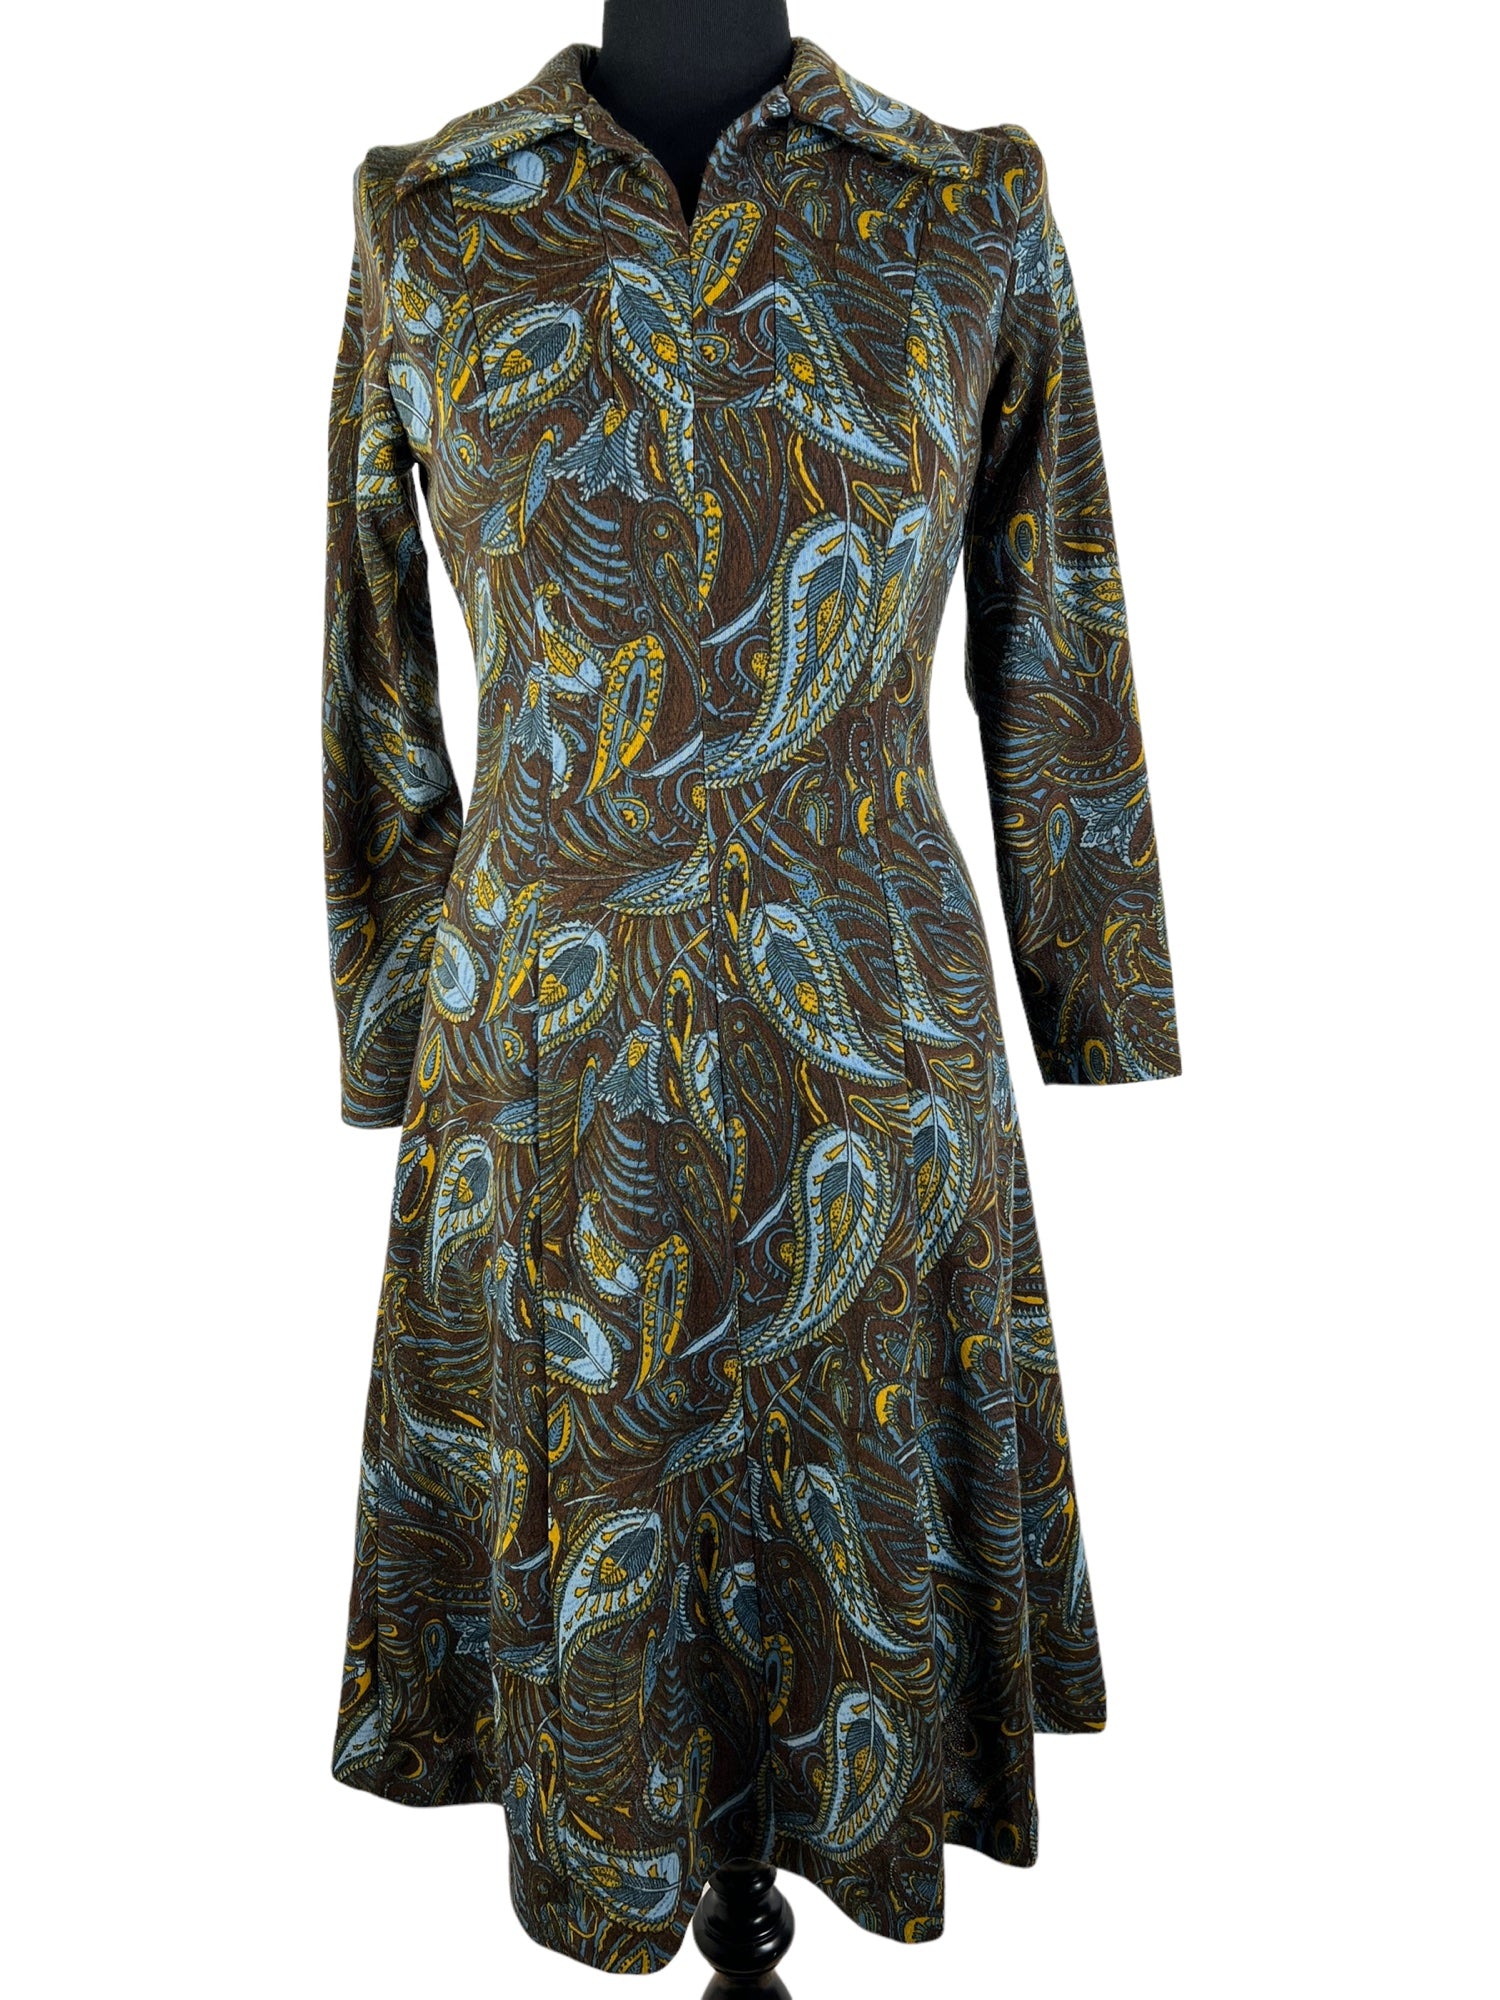 zip back  zip  zero waste  womens  waist belt  vintage  v-neck dress  V-Neck  Urban Village Vintage  urban village  UK  thrifted  thrift  sustainable  style  store  slow fashion  shop  second hand  save the planet  reuse  recycled  recycle  recycable  preloved  pointed collar  Paisley Print  paisley  online  midi dress  ladies  fashion  evening  ethical  Eco friendly  Eco  dress  concious fashion  clothing  clothes  brown  Blue  Birmingham  70s  1970s  10